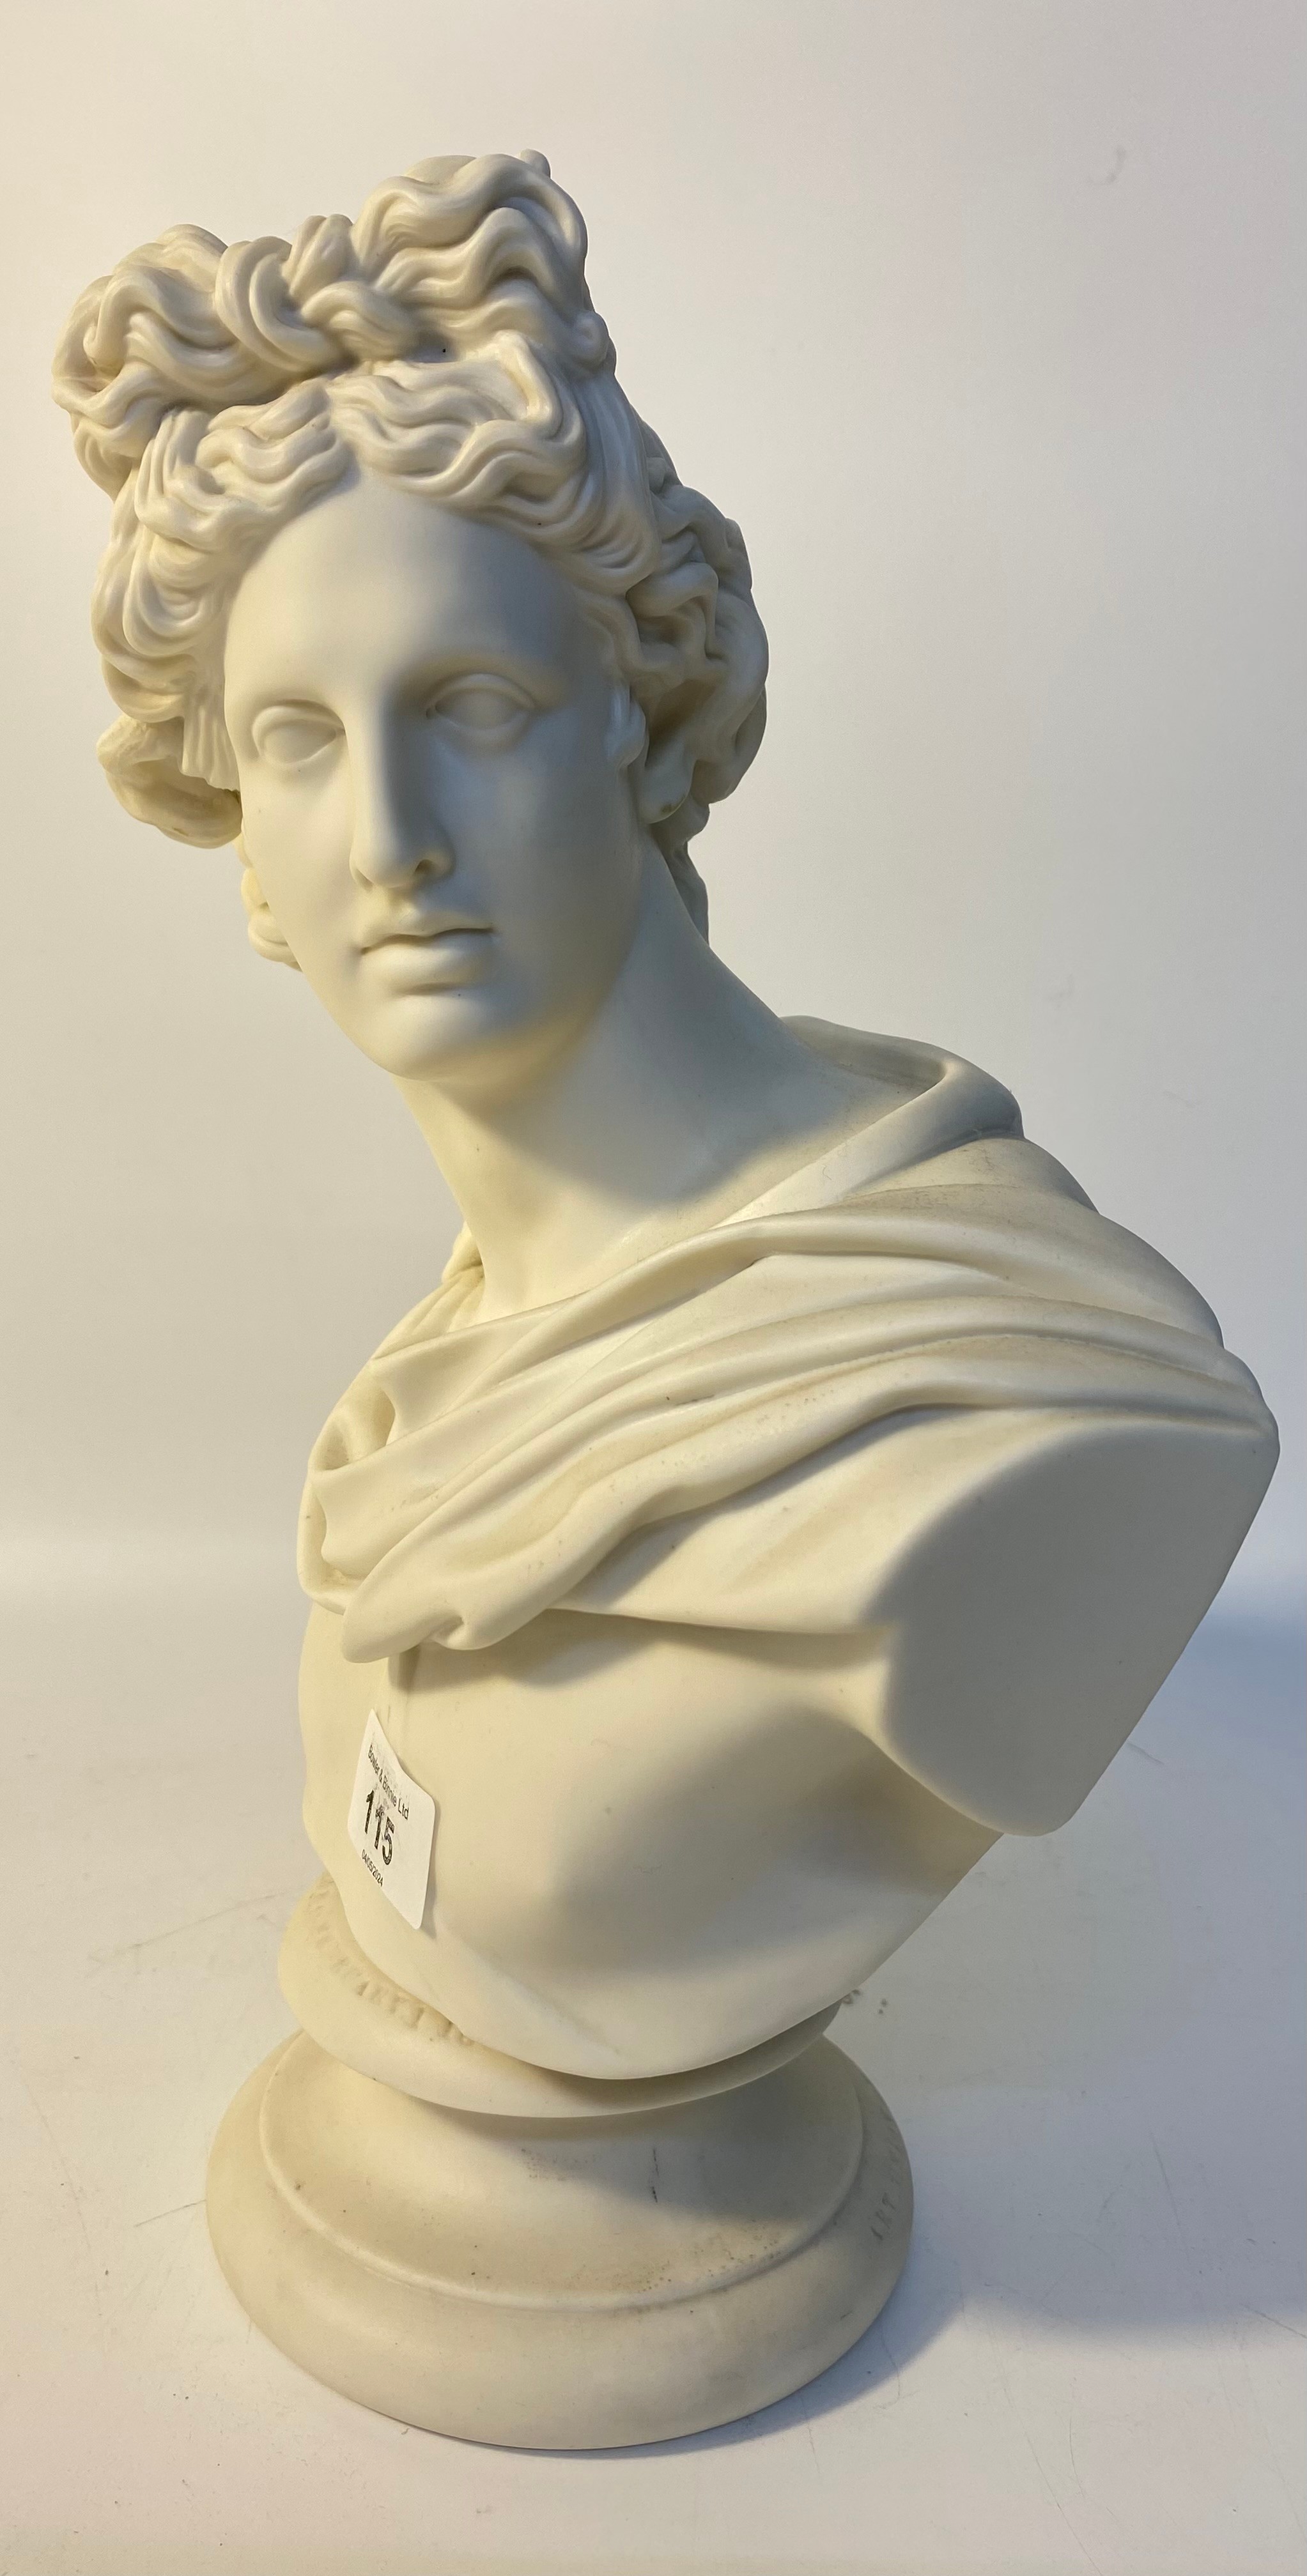 Parian Ware Bust Of Apollo by Delpech [23x35cm] - Image 2 of 5